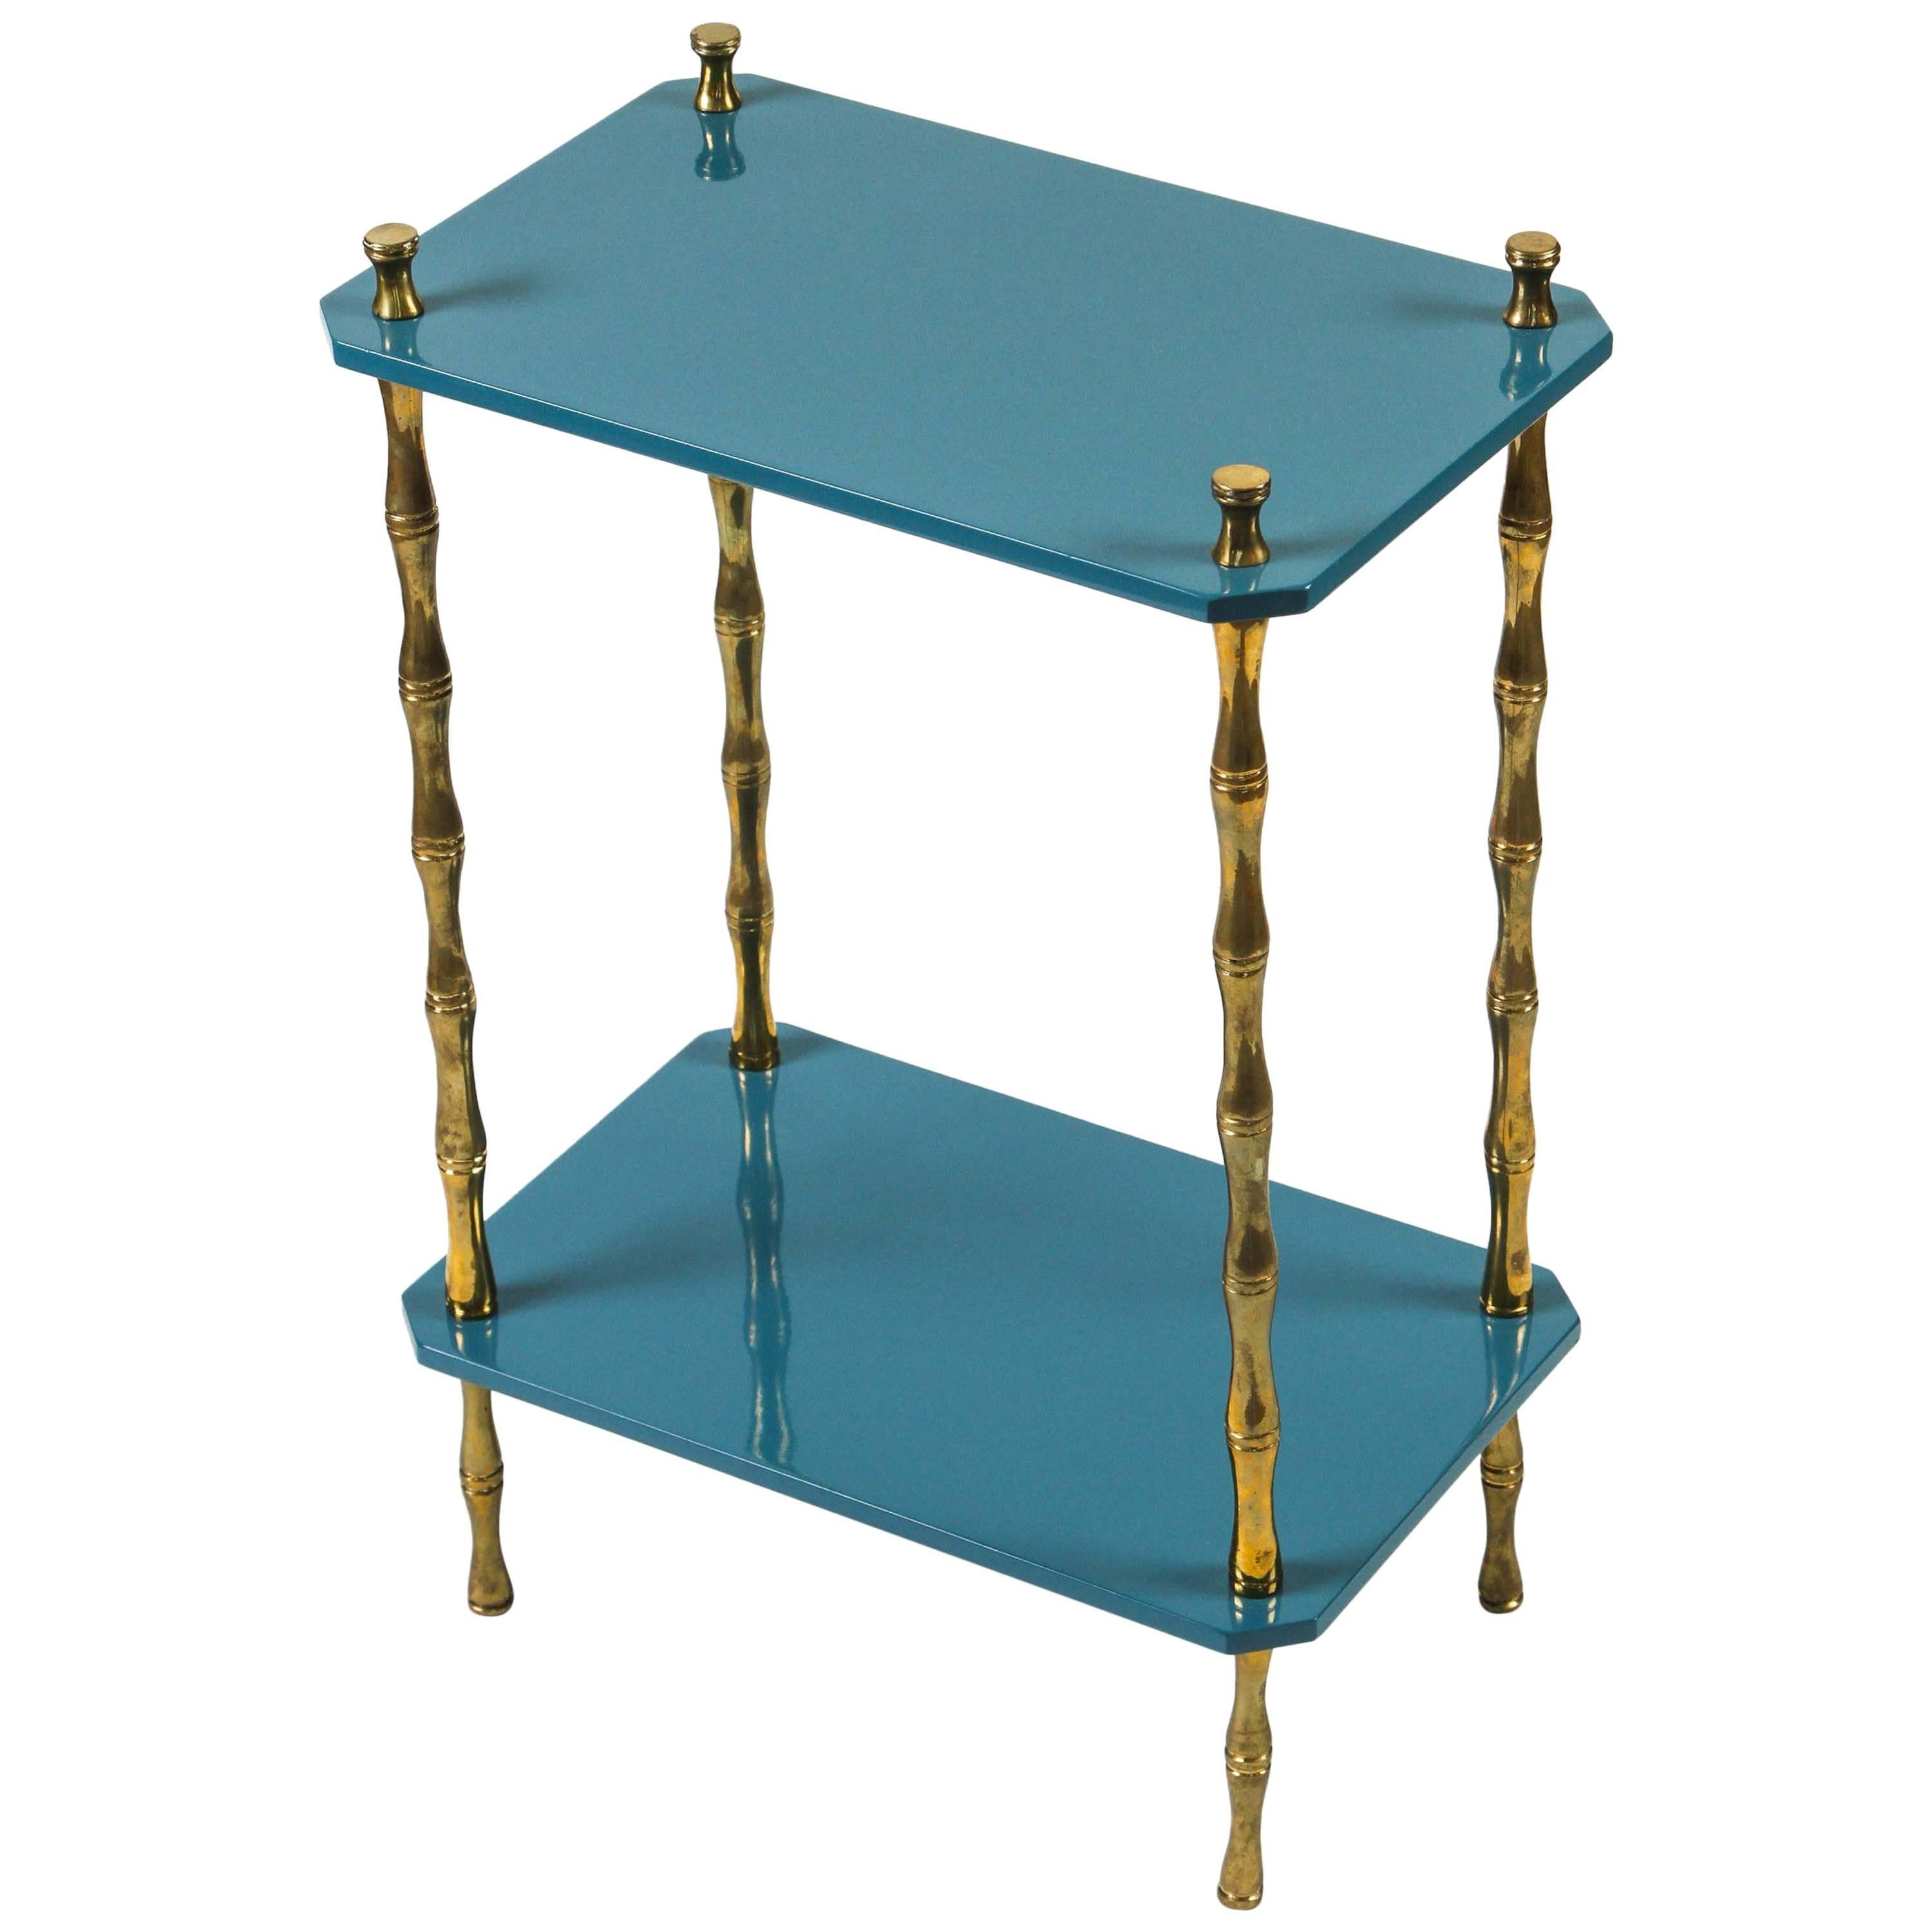 Hollyhock "Freddie" Drinks Table in Teal Blue with Brass Bamboo Legs